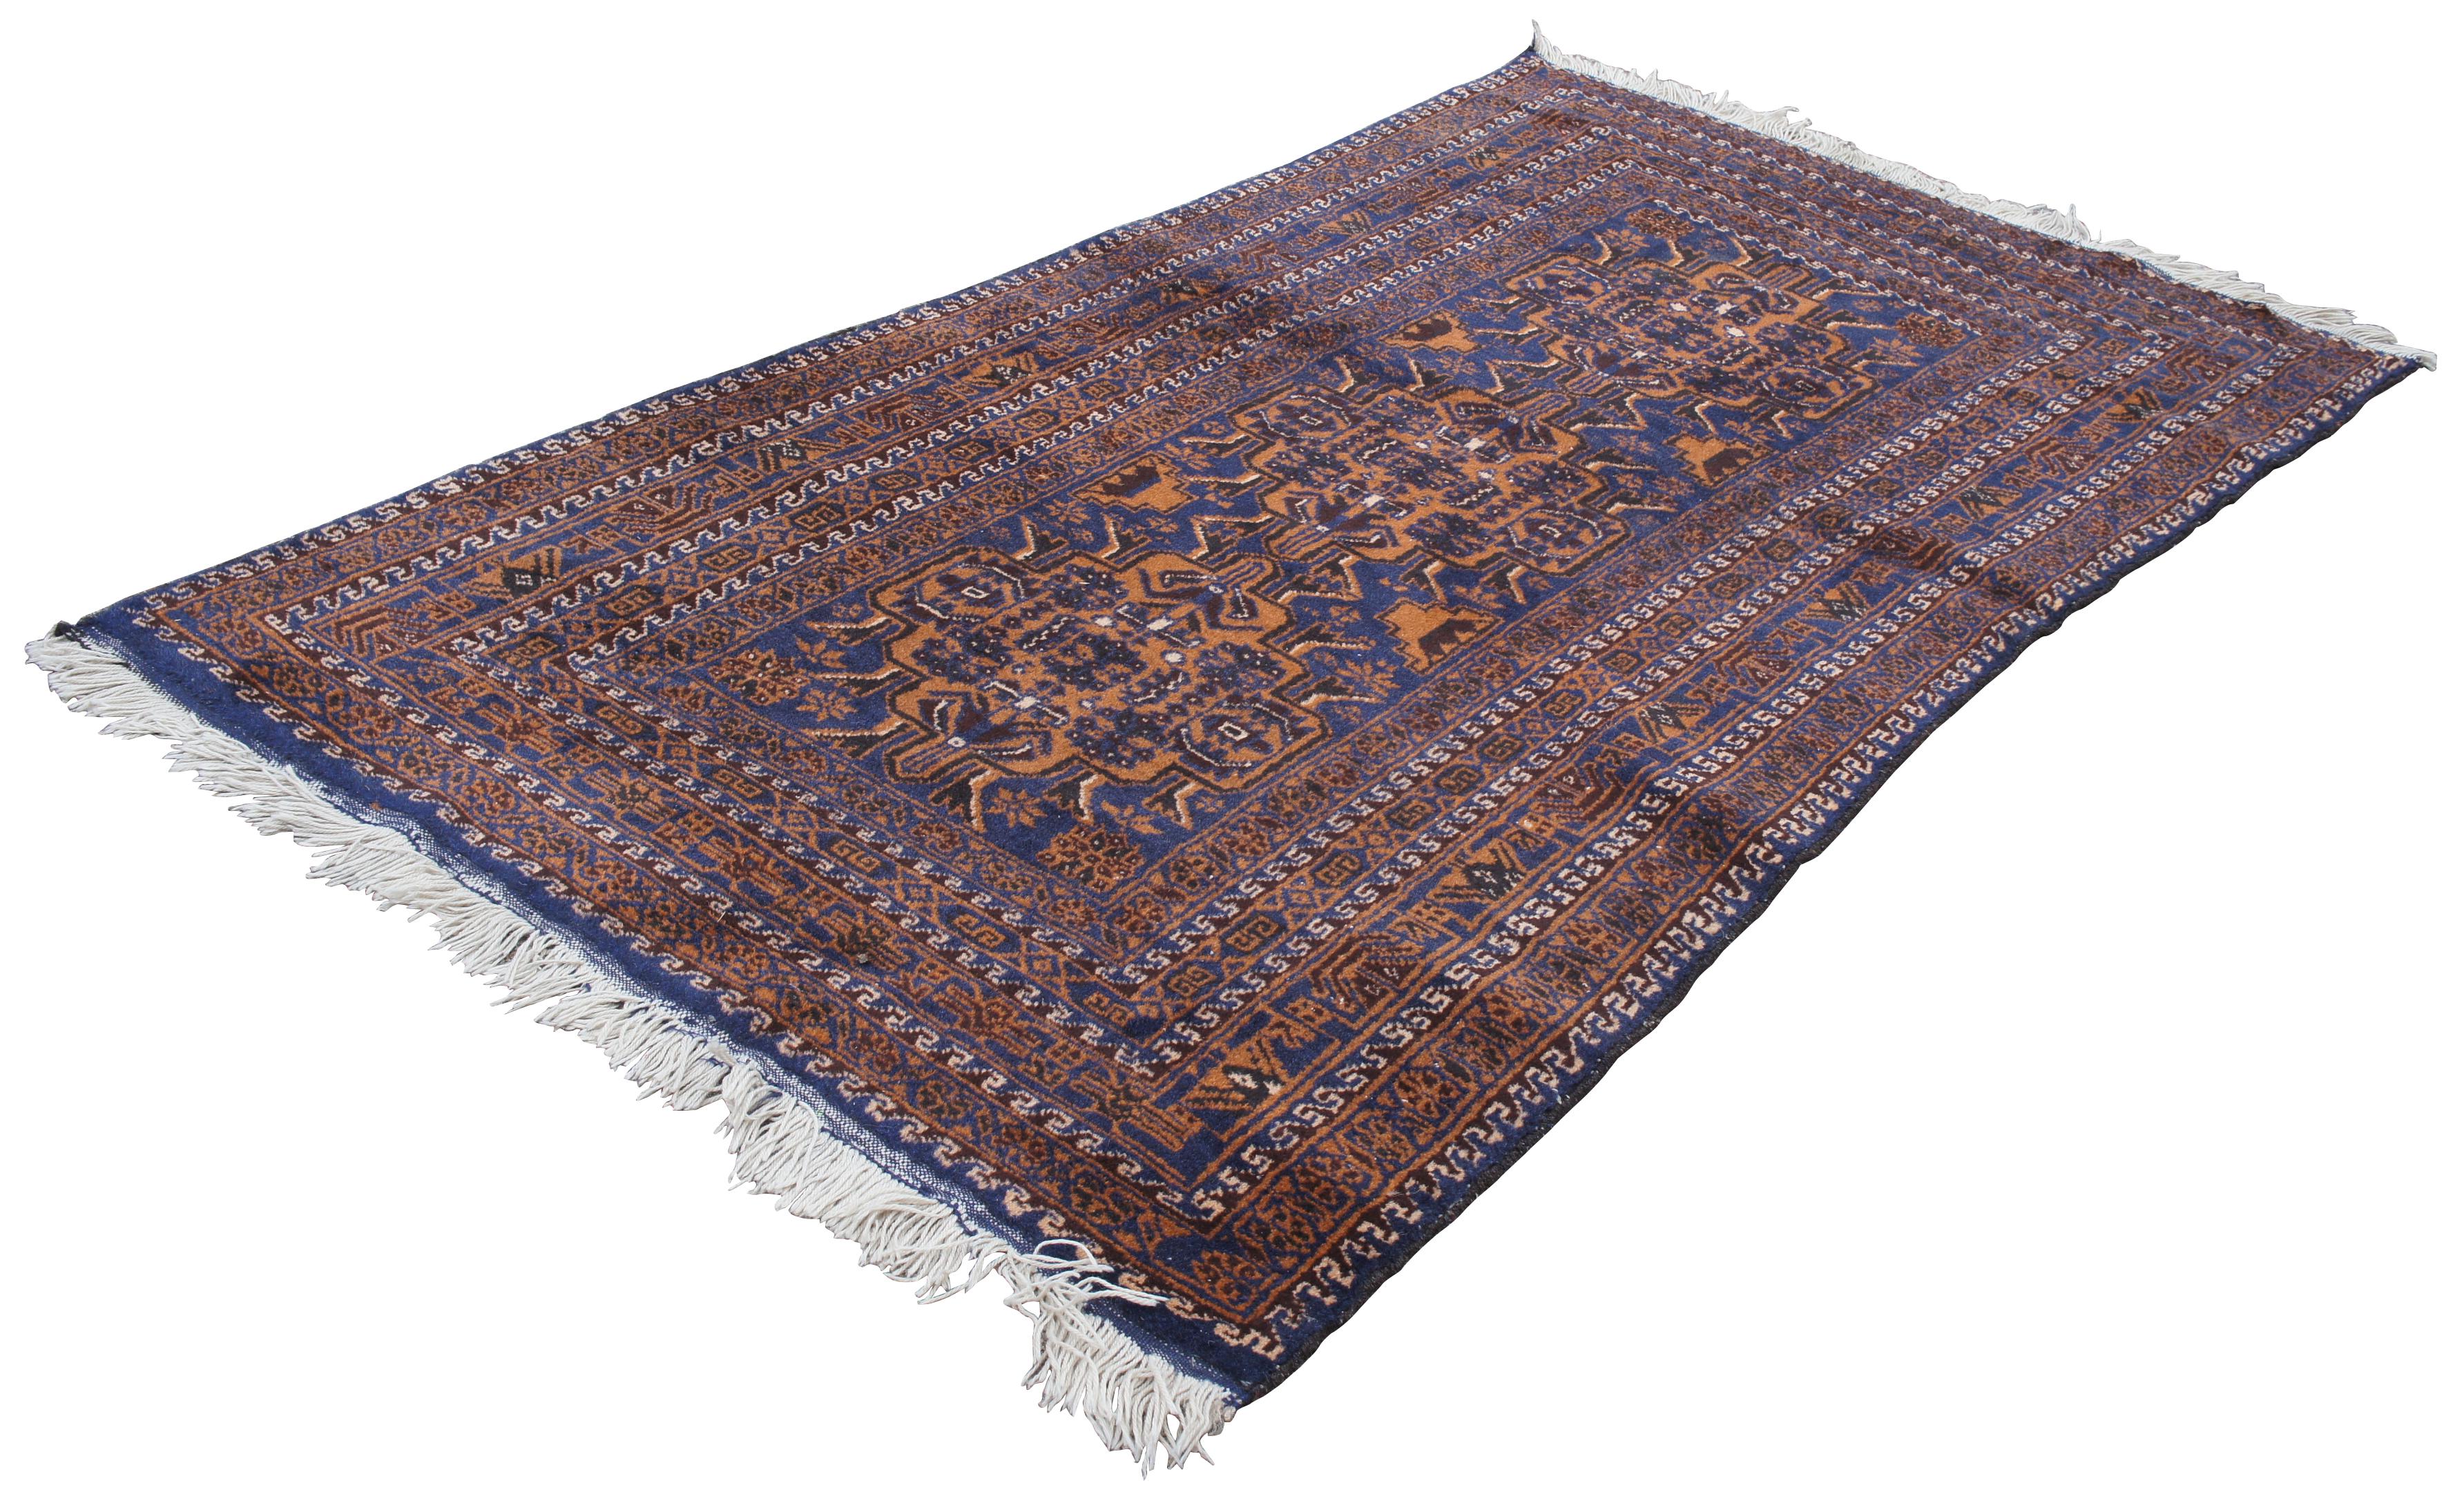 Vintage Persian Afghan Baluch Hand Knotted Area Rug Runner Carpet In Good Condition For Sale In Dayton, OH